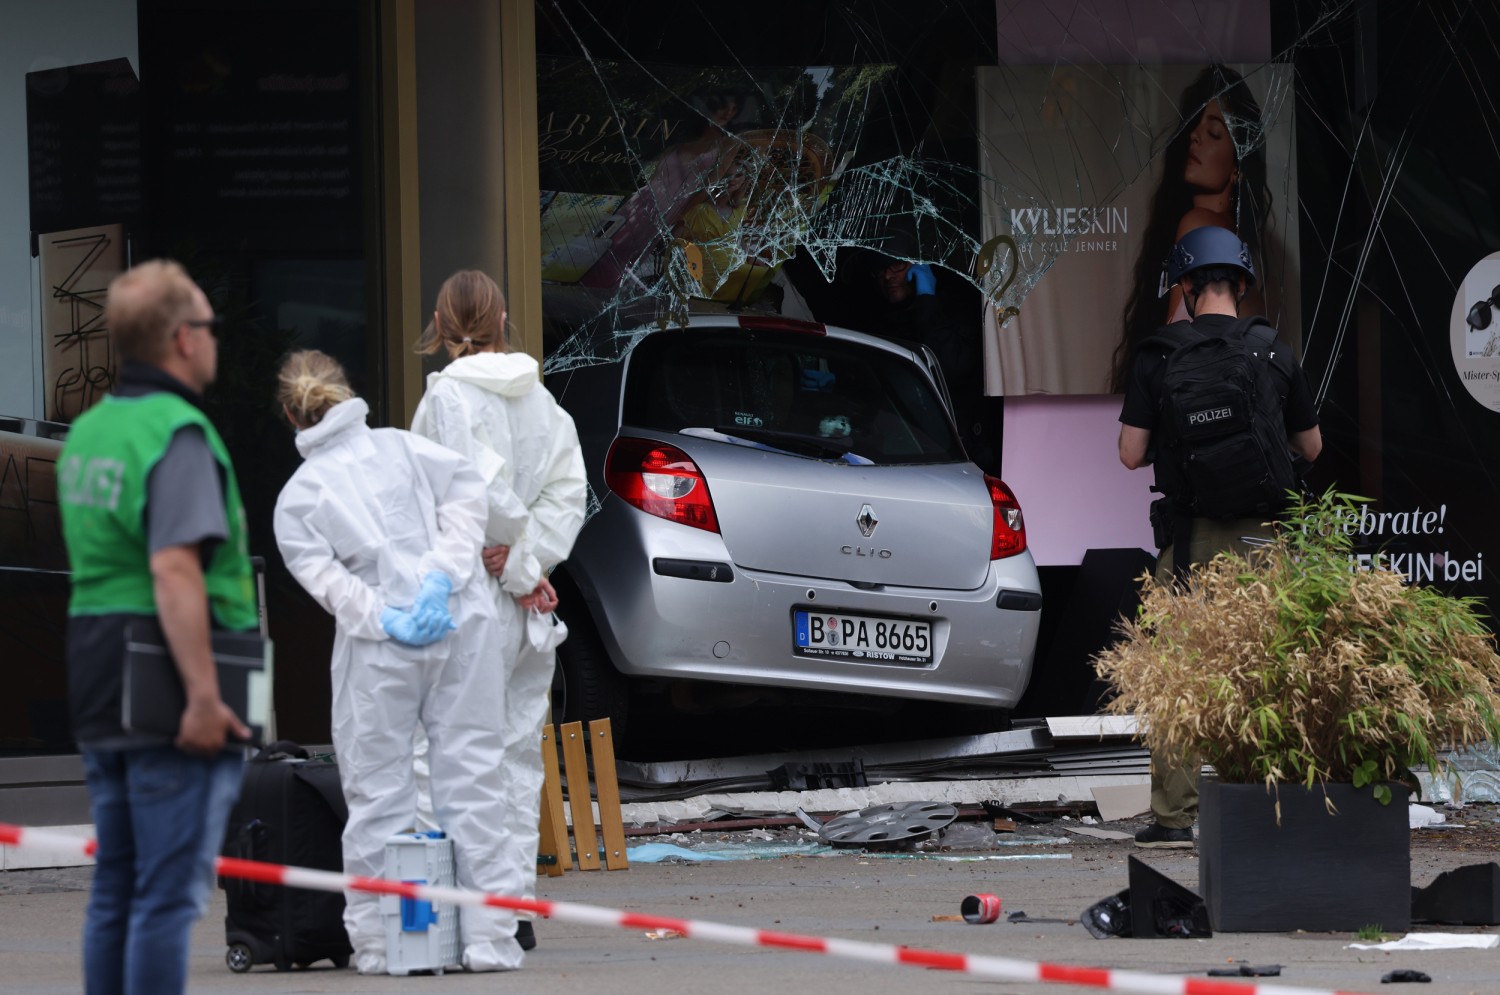 Man Drives Into Crowd in Berlin, Killing Teacher, Injuring 14 Students